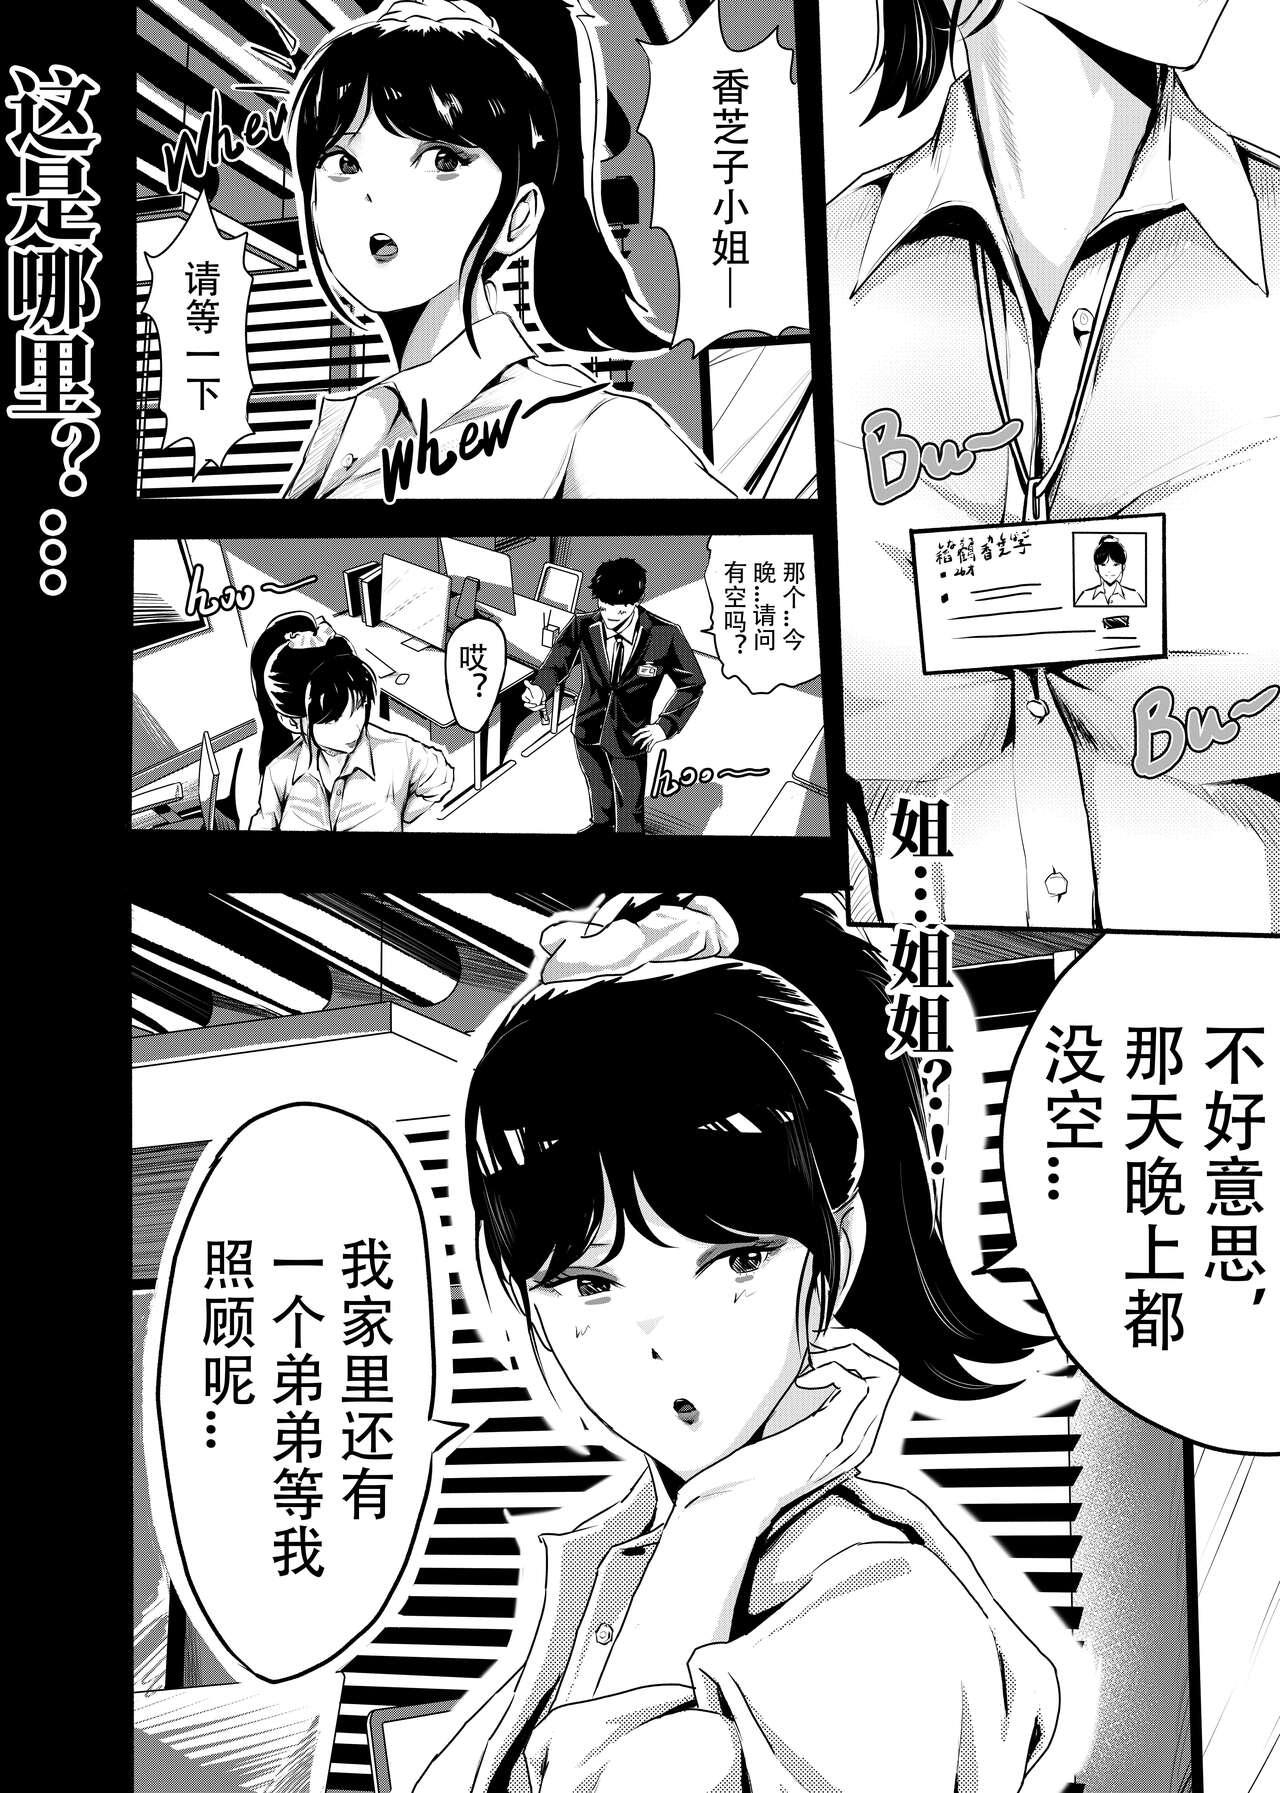 [KAO.YELLOW STUDIO (T.C.X)] I must be out of my mind to fall in love with SAORI, the Snuff Queen Ch.1-16 | 想与冰恋女王纱织同学谈恋爱的我脑子一定有问题 第1-16话 [Chinese] 216